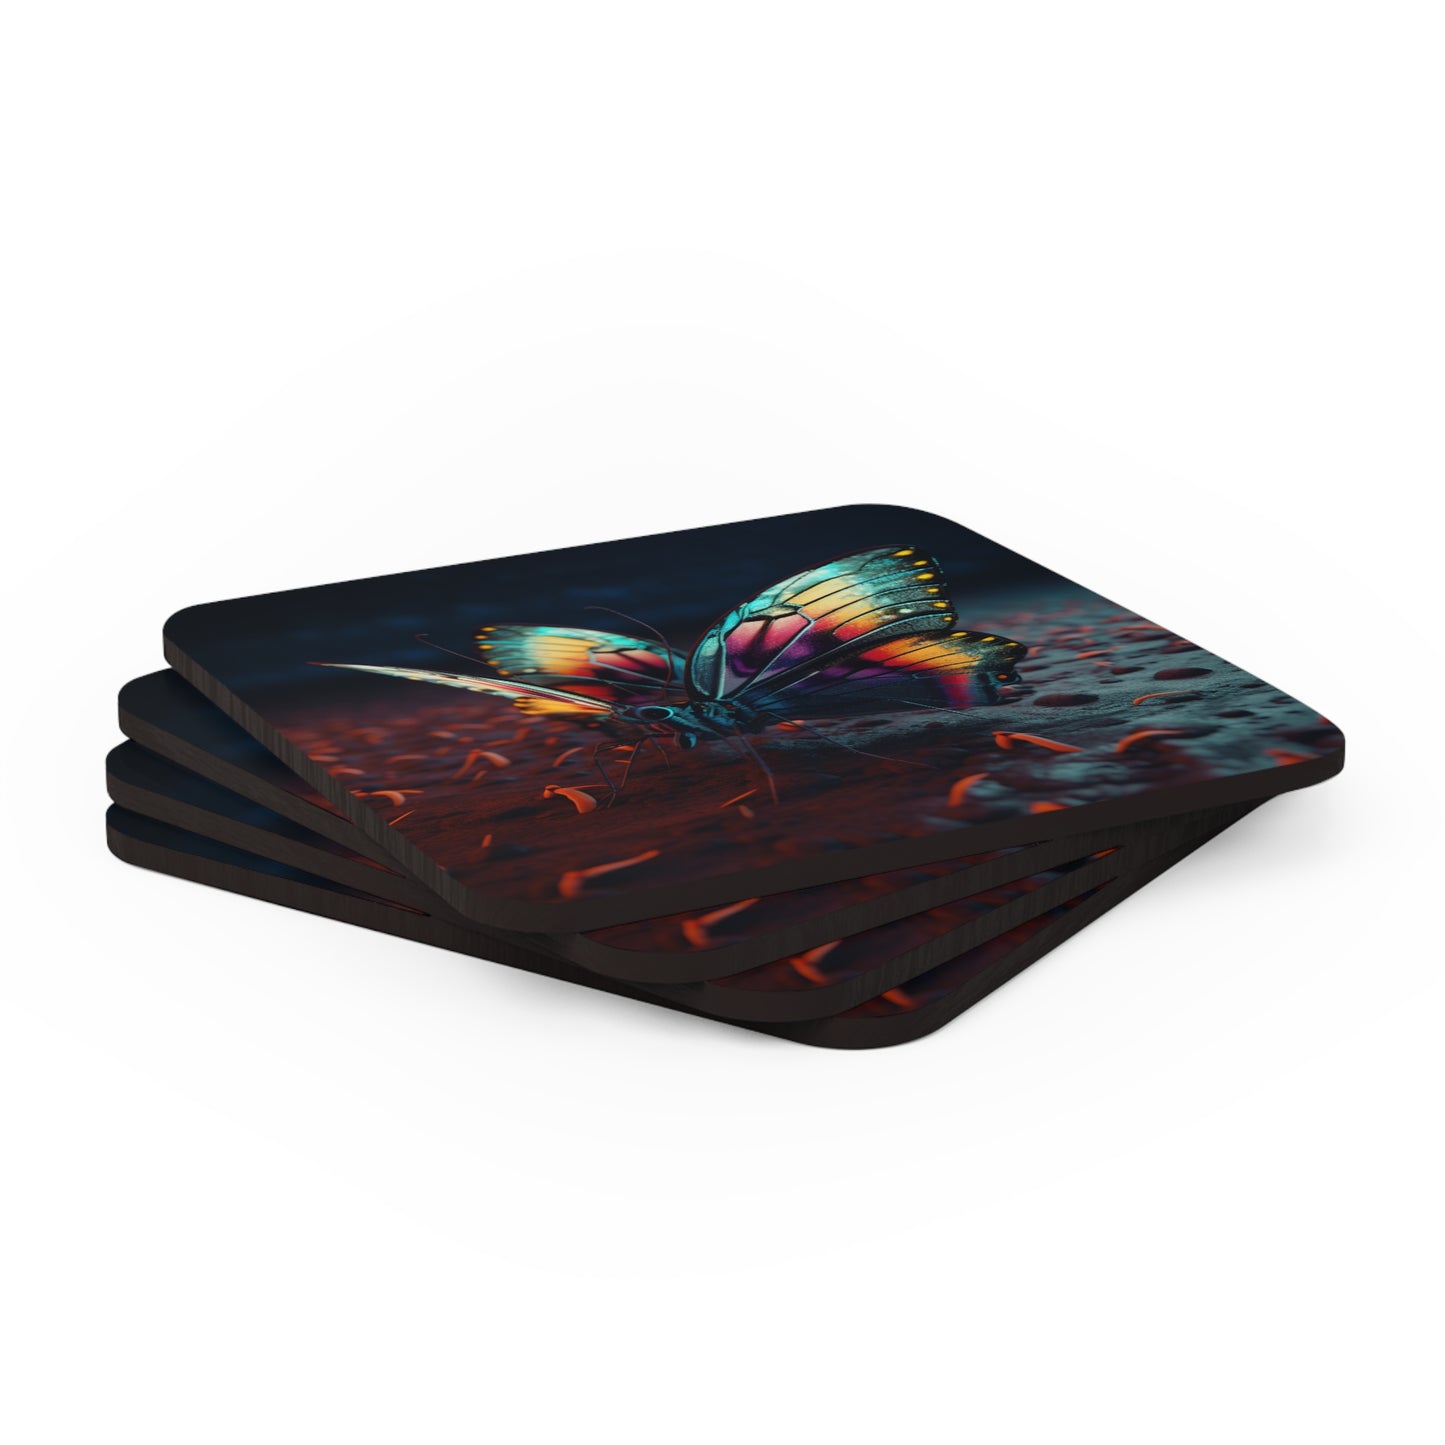 Corkwood Coaster Set Hyper Colorful Butterfly Macro 1